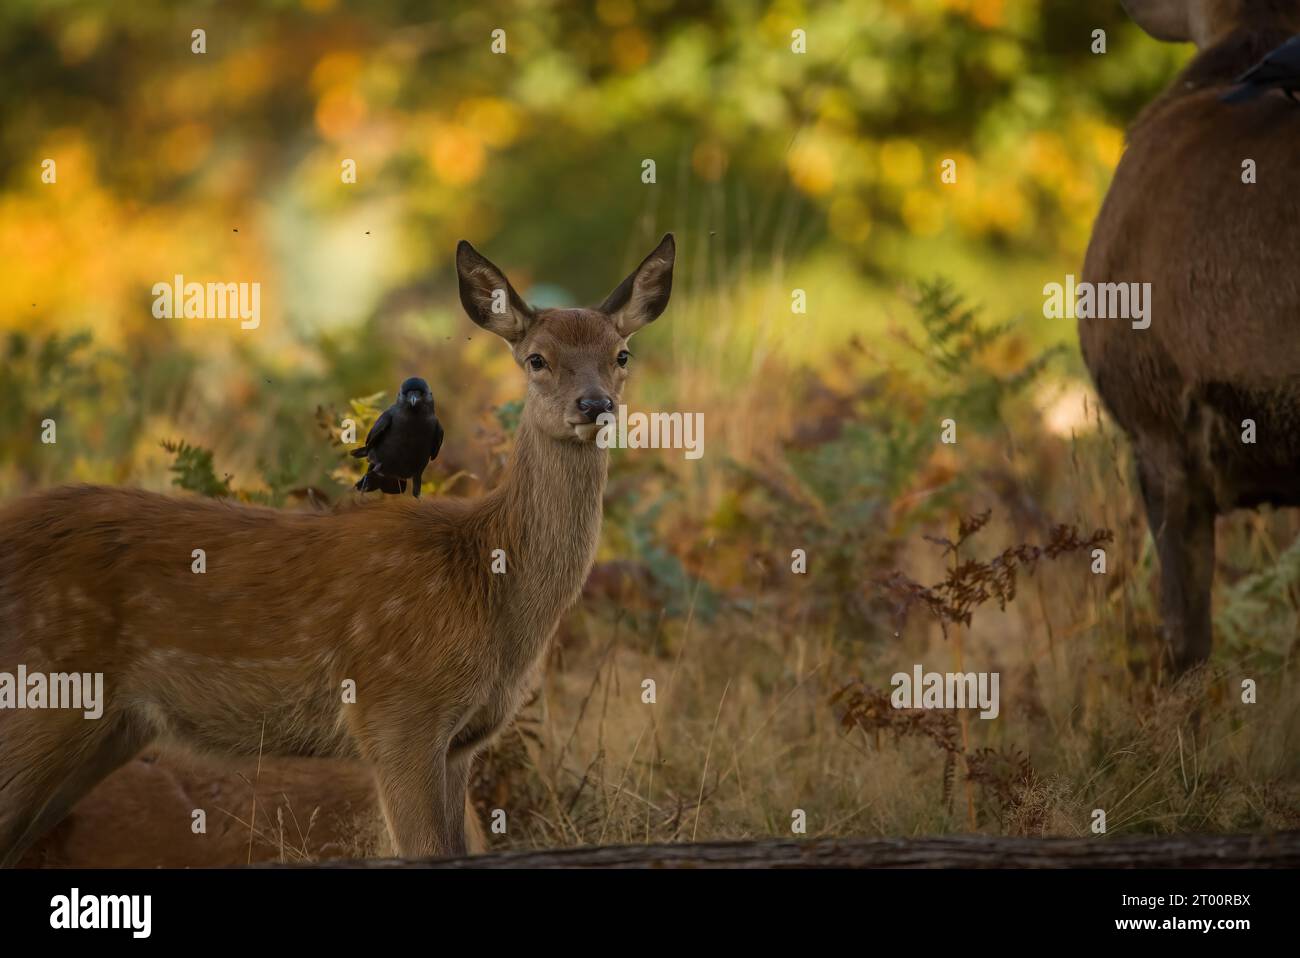 The friendship of a crow and a baby deer MIDDLESEX ENDEARING images show a crow using the head of an adorable red deer like a lookout post.    These p Stock Photo